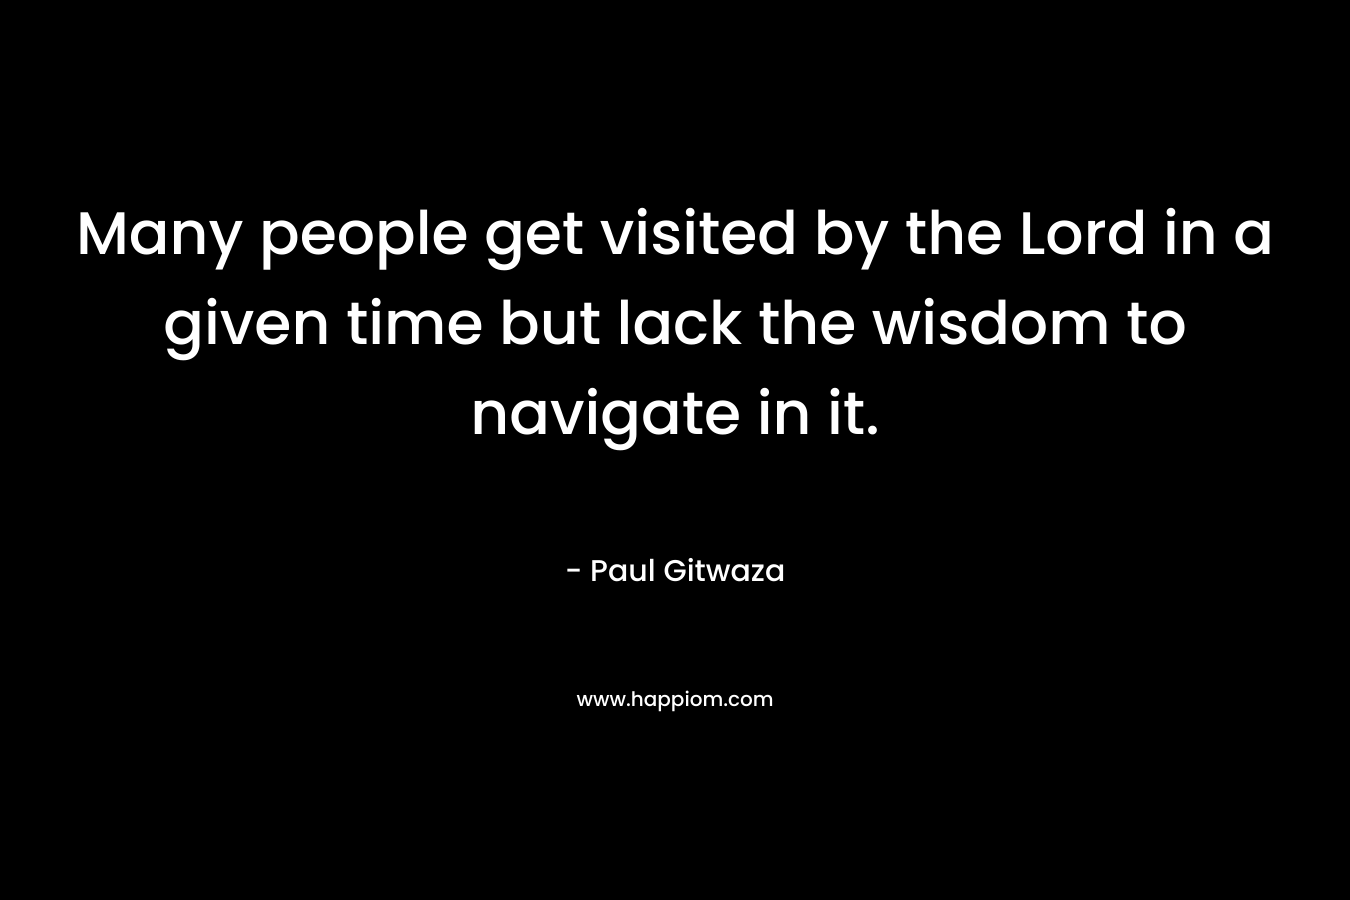 Many people get visited by the Lord in a given time but lack the wisdom to navigate in it.